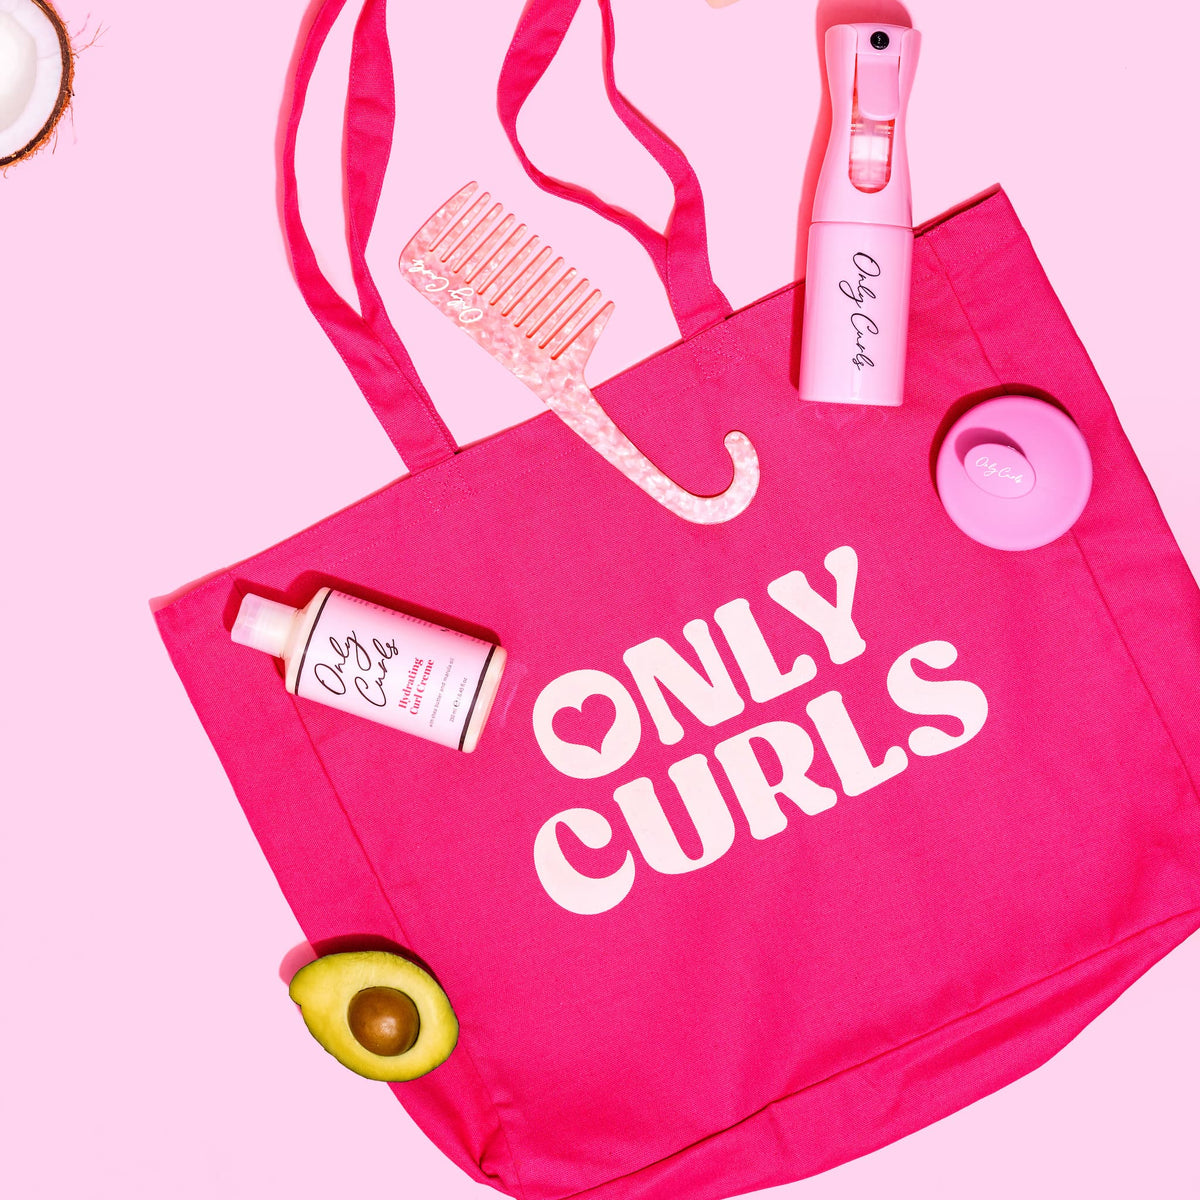 Only Curls Tote Bag - Only Curls Heart Coral - Only Curls